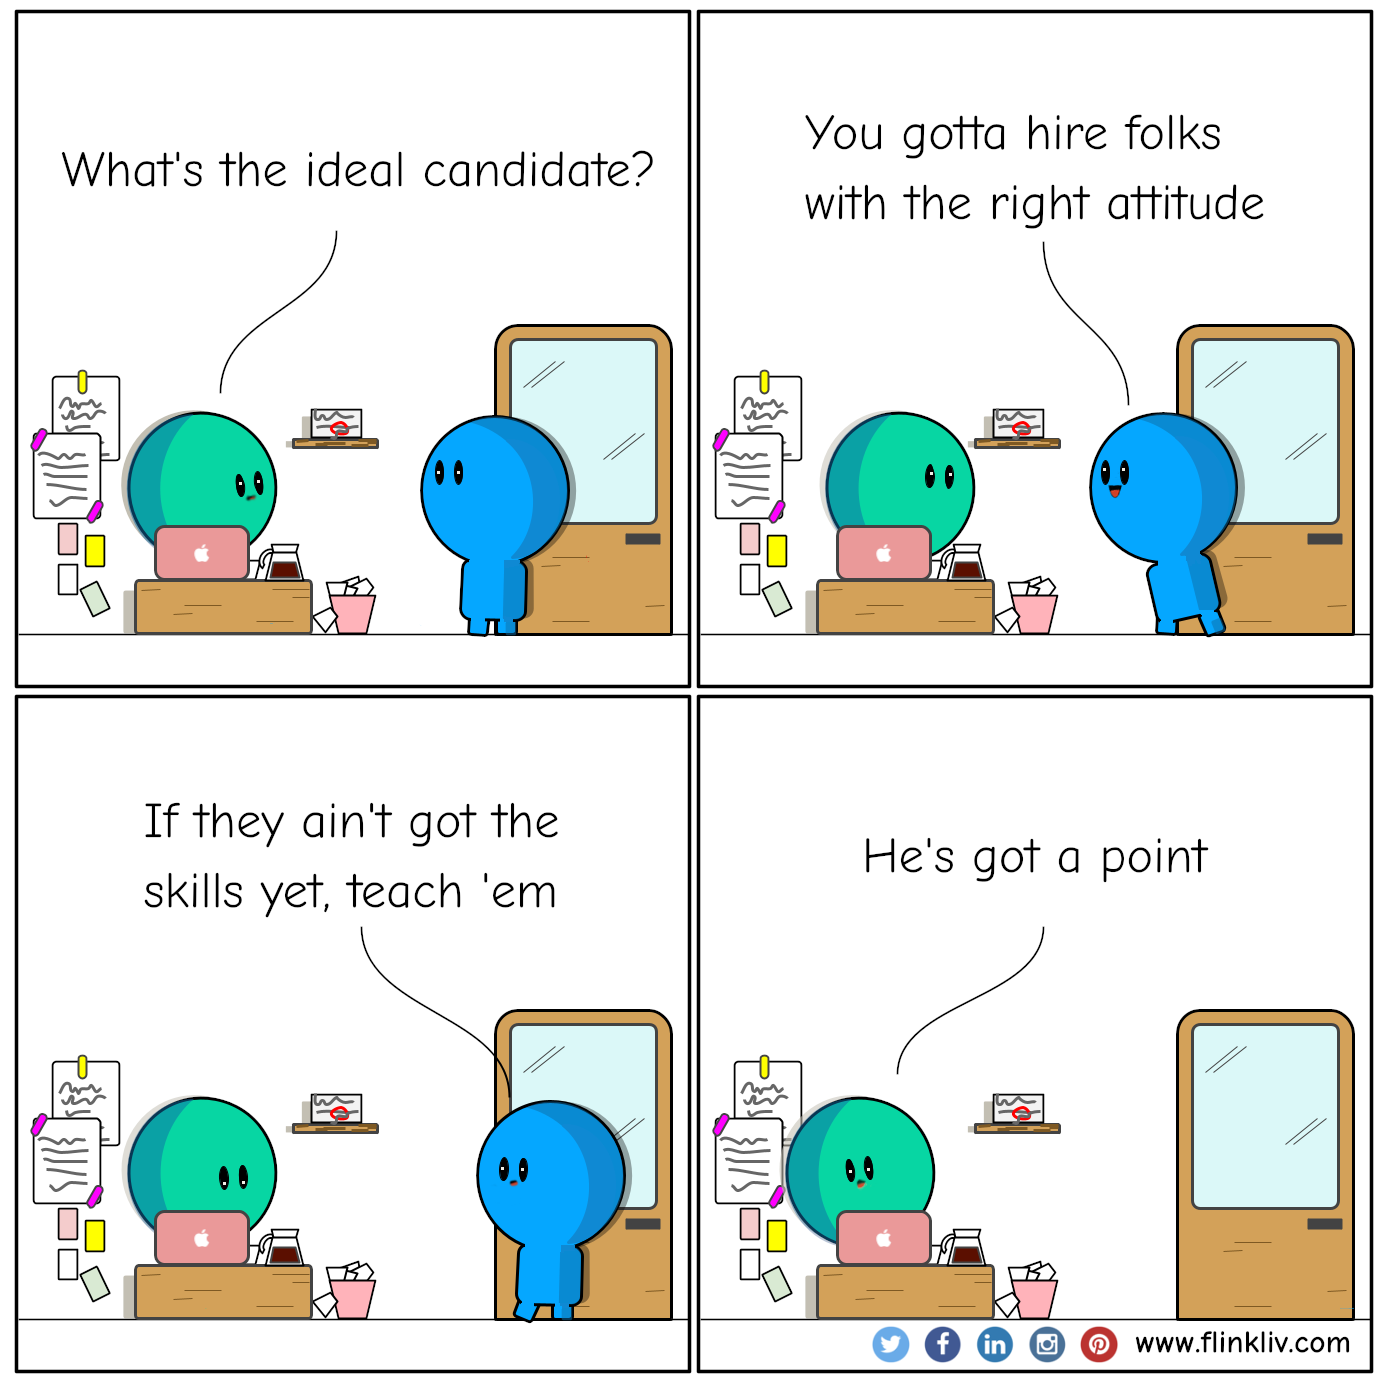 Conversation between A and B about how to hire the ideal candidate A: What's the ideal candidate? B: You gotta hire folks with the right attitude. B: If they ain't got the skills yet, teach 'em. A: He's got a point. By Flinkliv.com